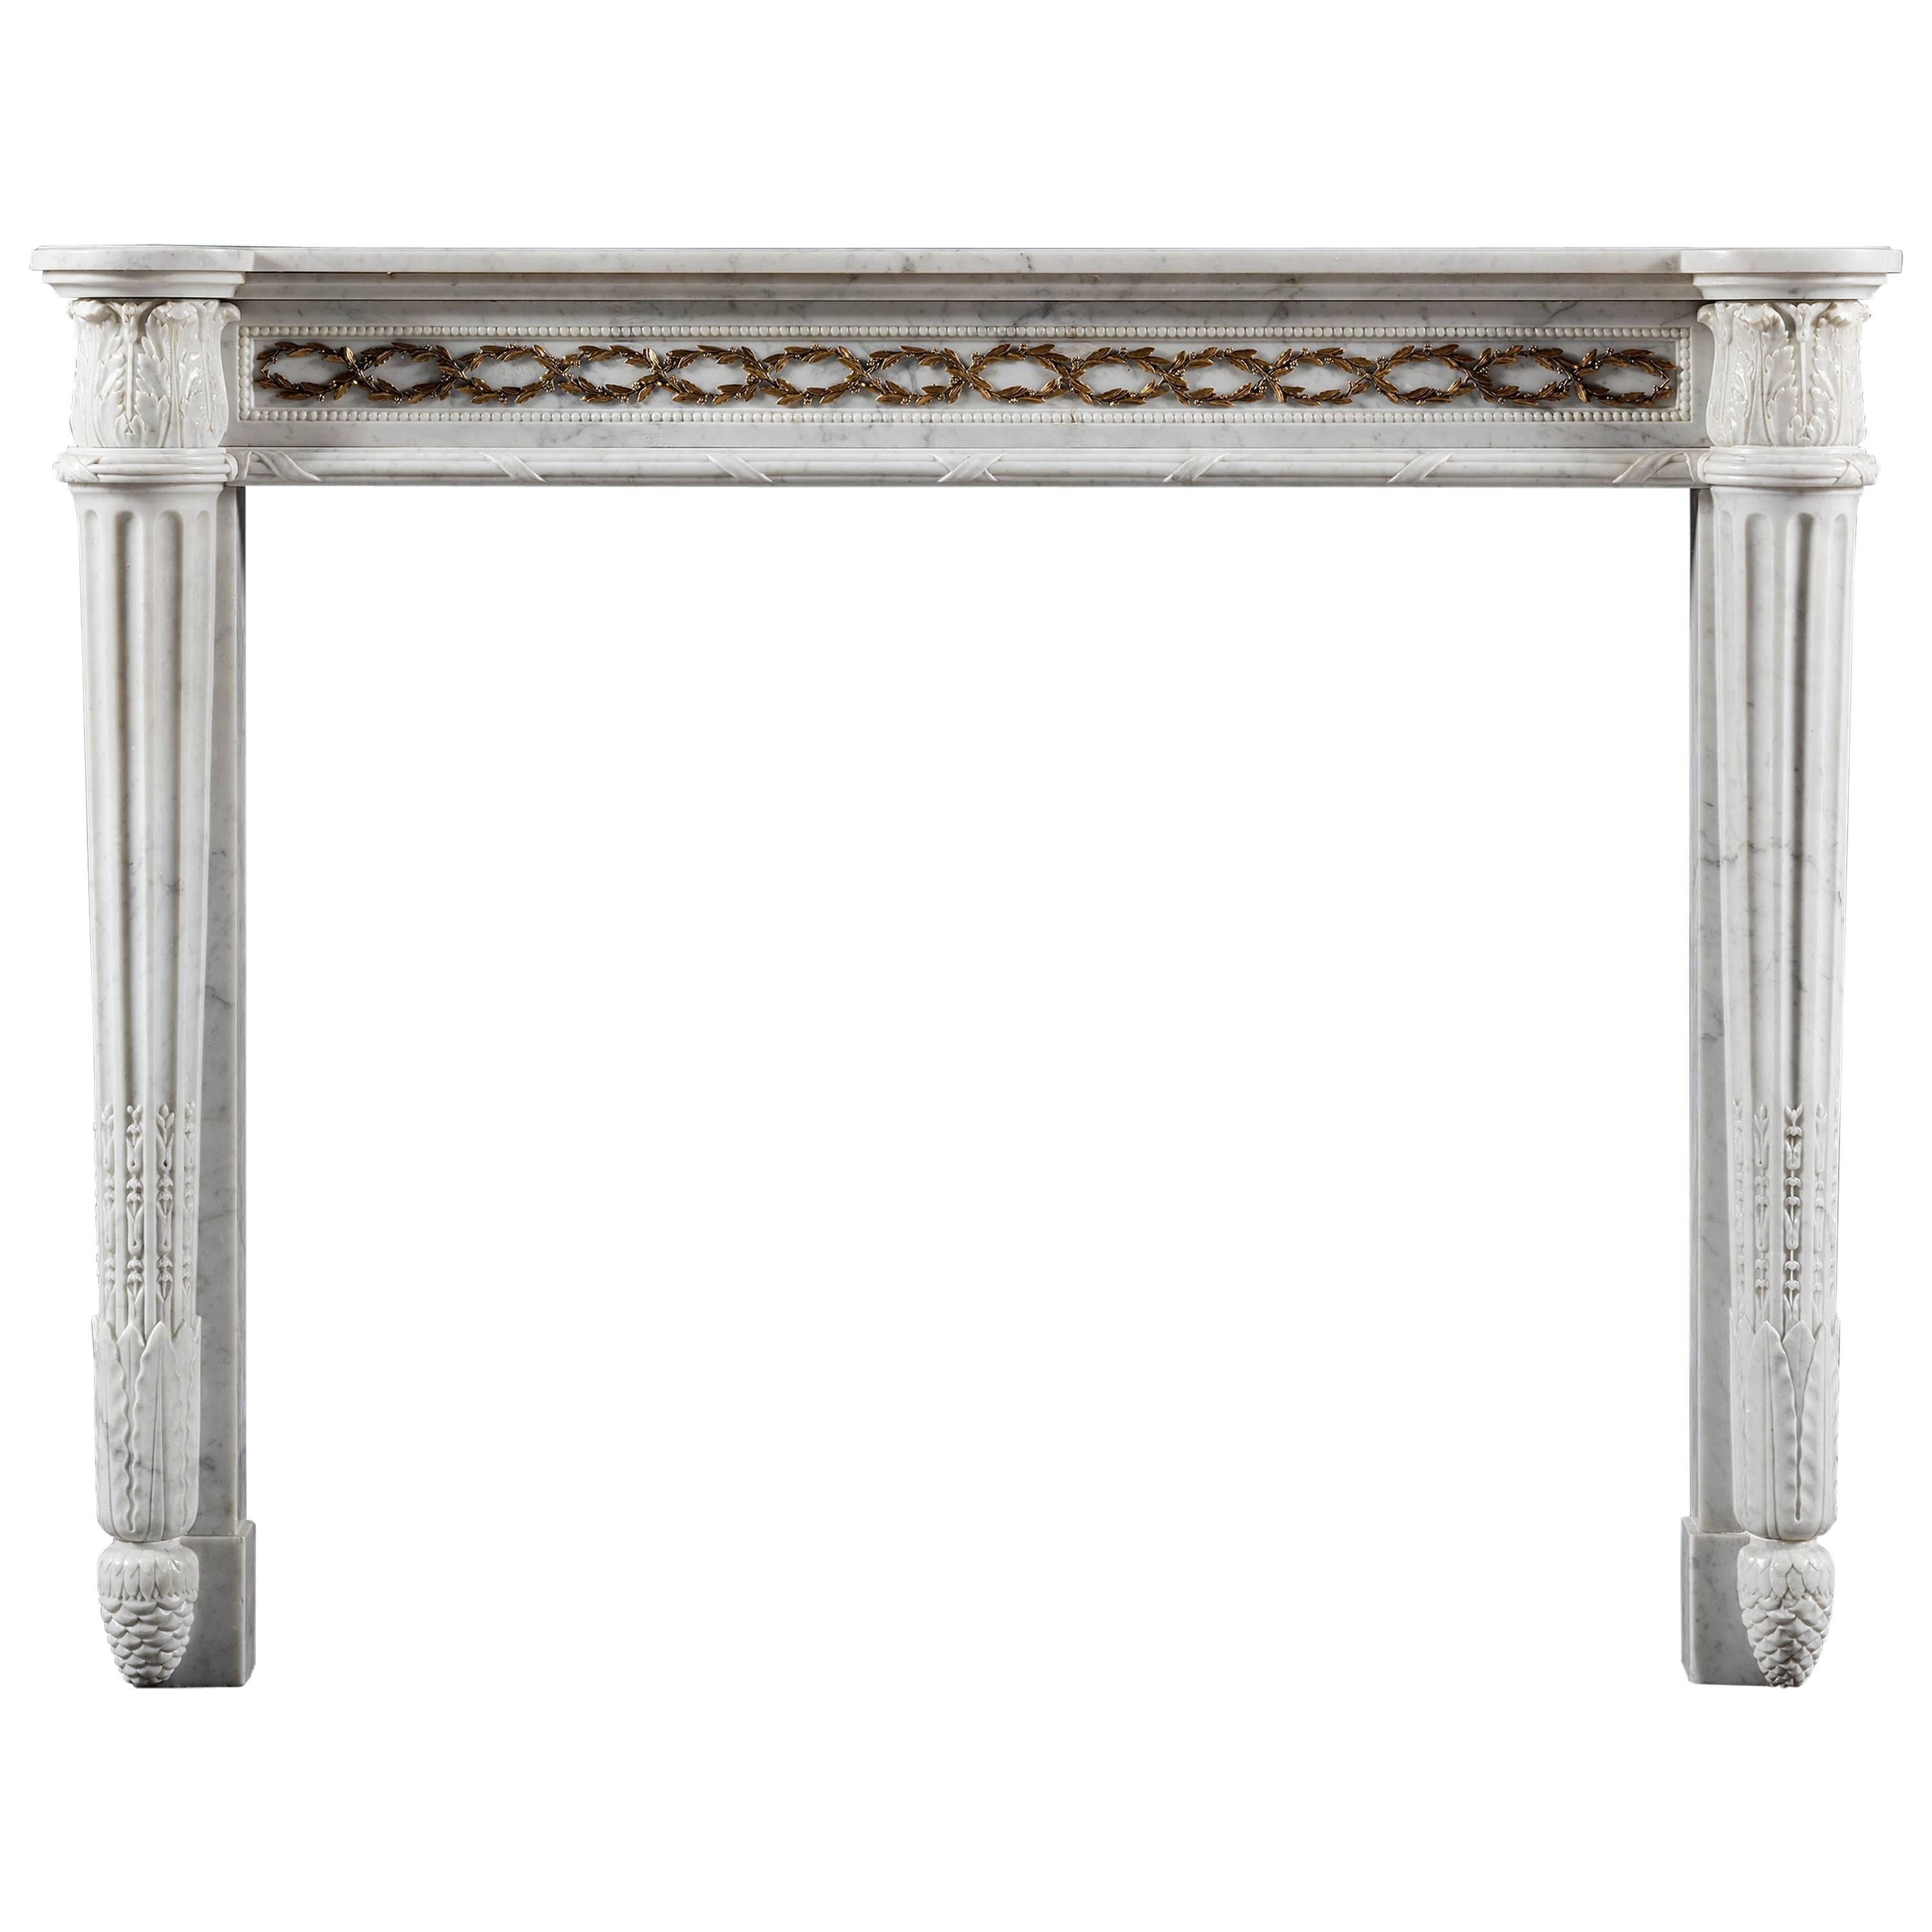 Antique 18th Century Louis XVI Marble Fireplace Surround with Ormolu Mounts For Sale